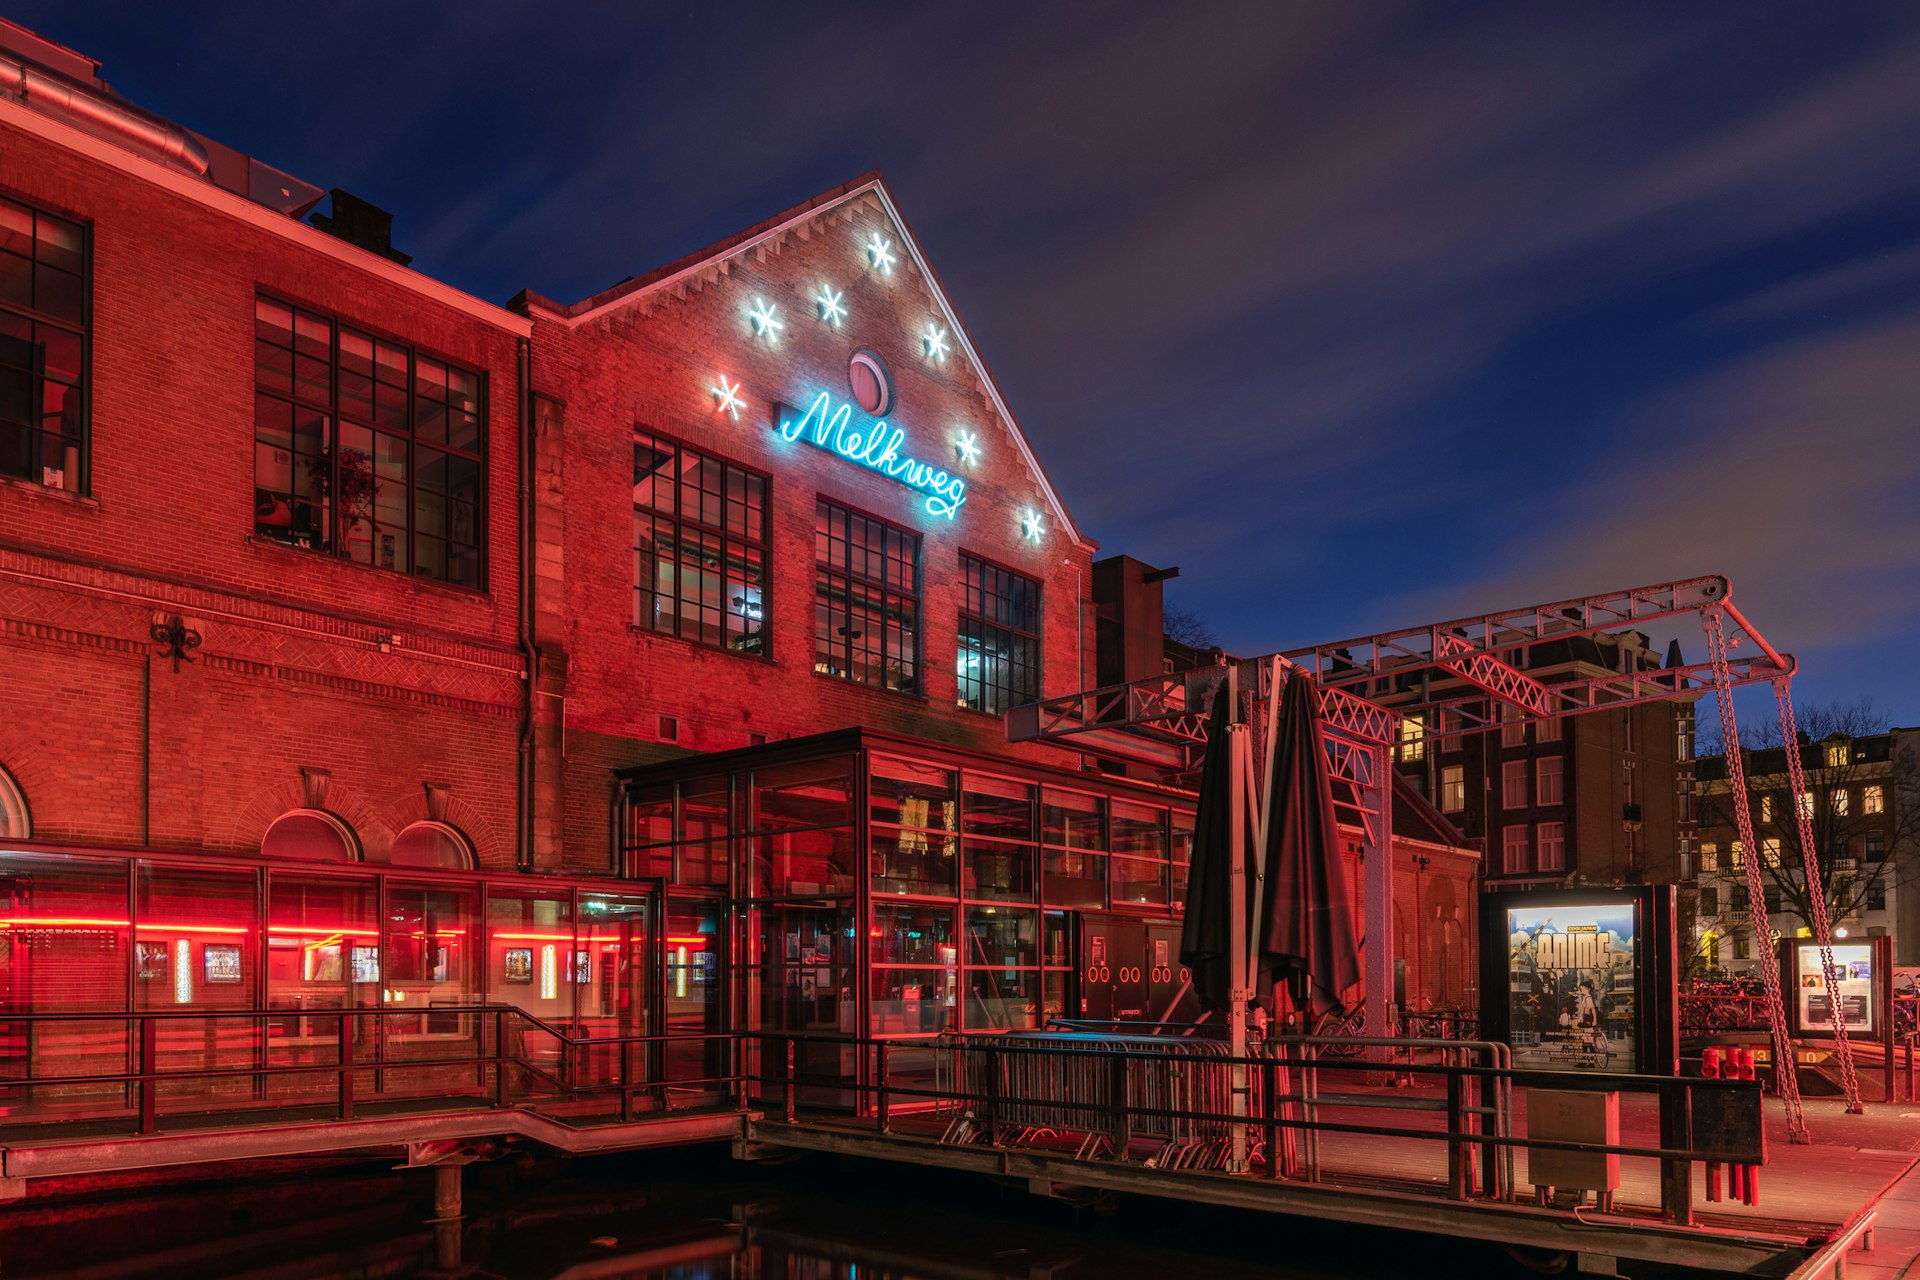 This is a picture of the Melkweg (meaning milkyway) music hall in the center of Amsterdam at night